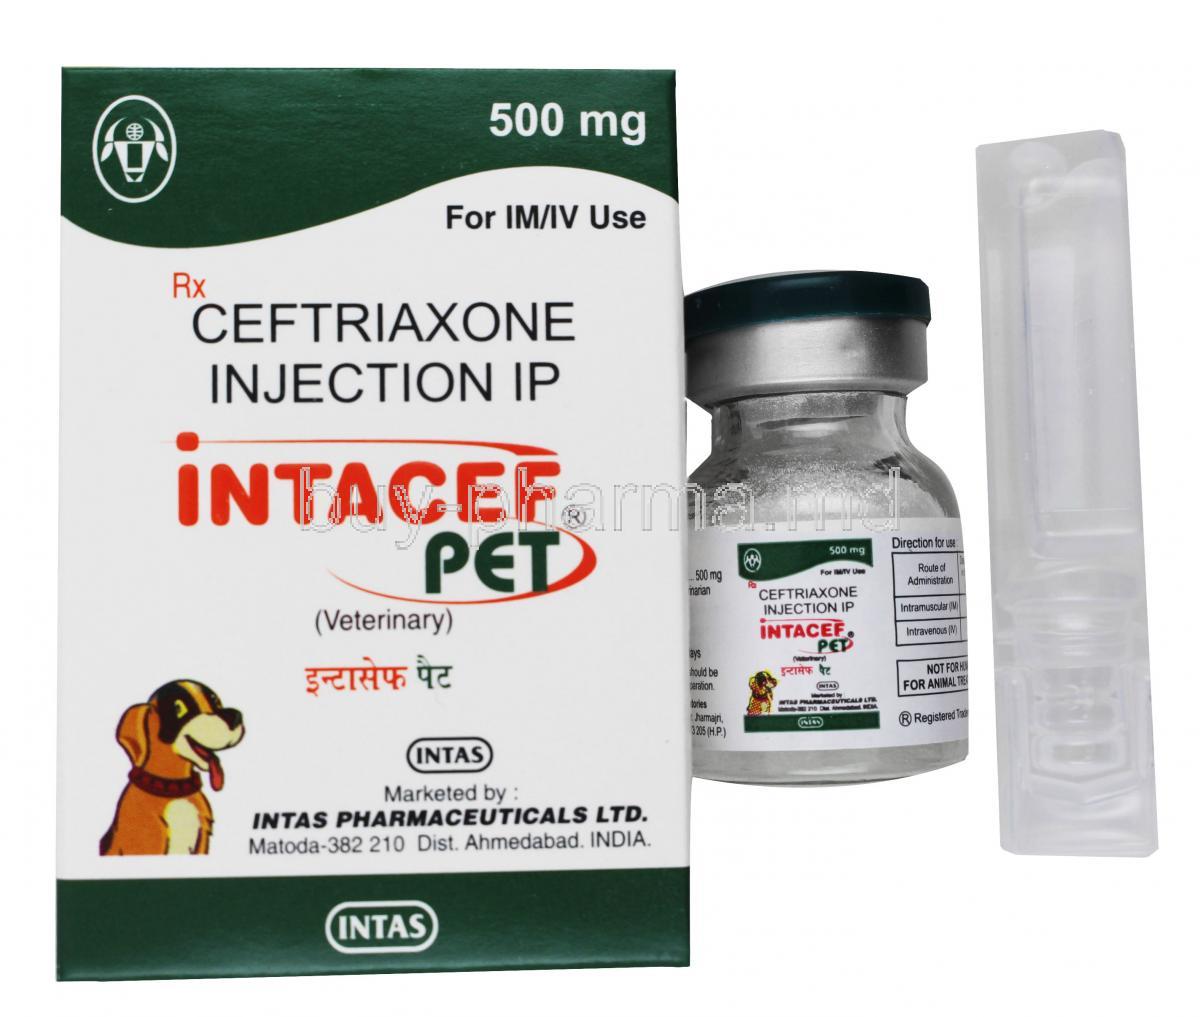 Intacef Tazo Injection for Pets box and vial